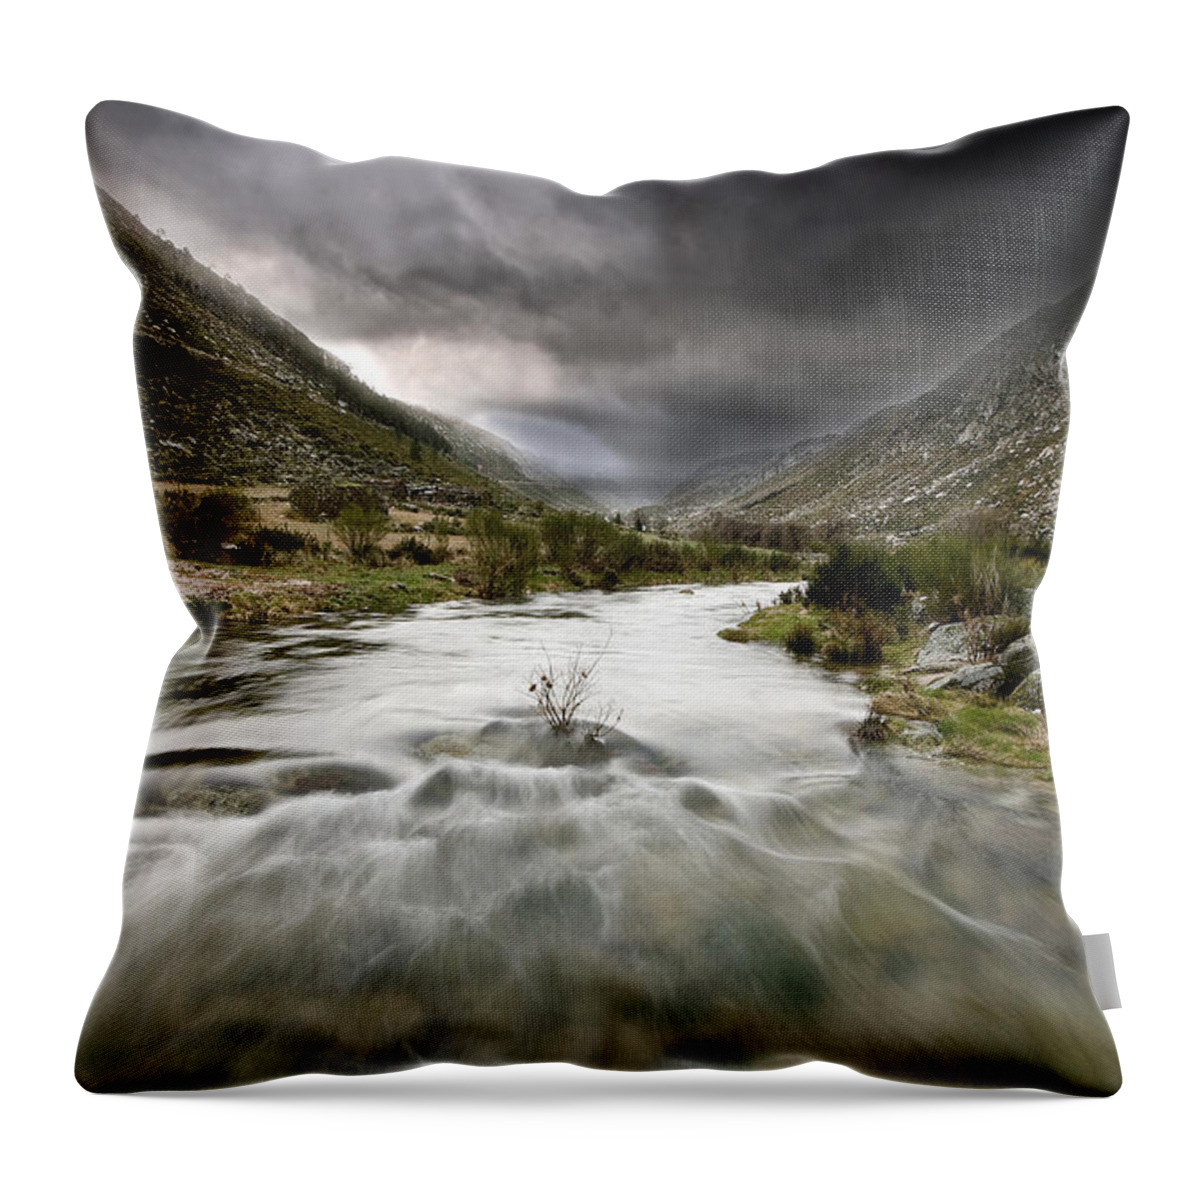 Landscape Throw Pillow featuring the photograph Flowing stream by Jorge Maia